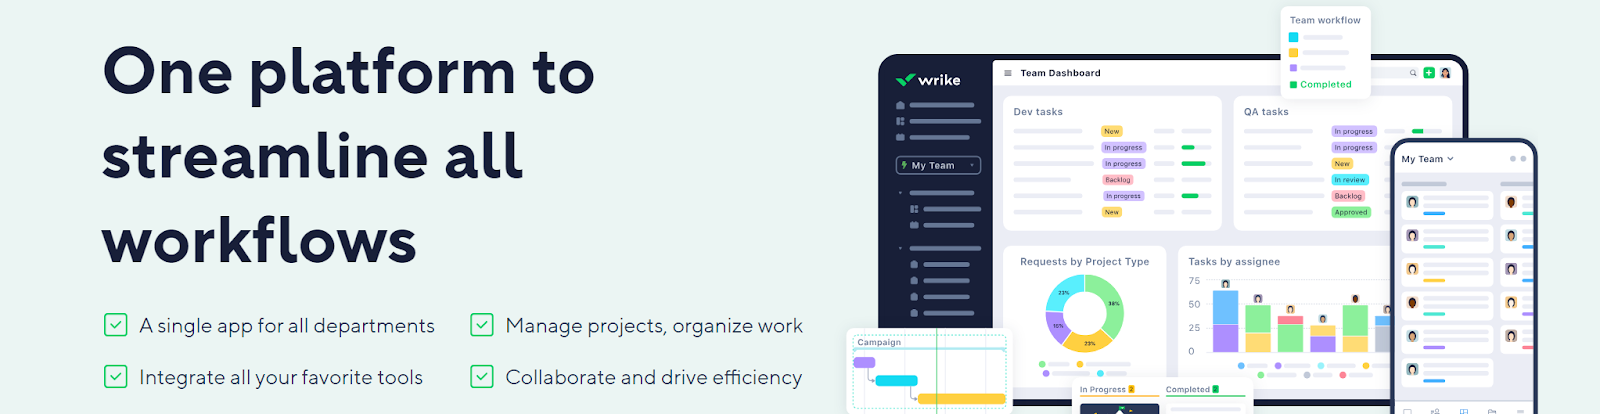 Image showing Wrike as one of the top free online project management tools